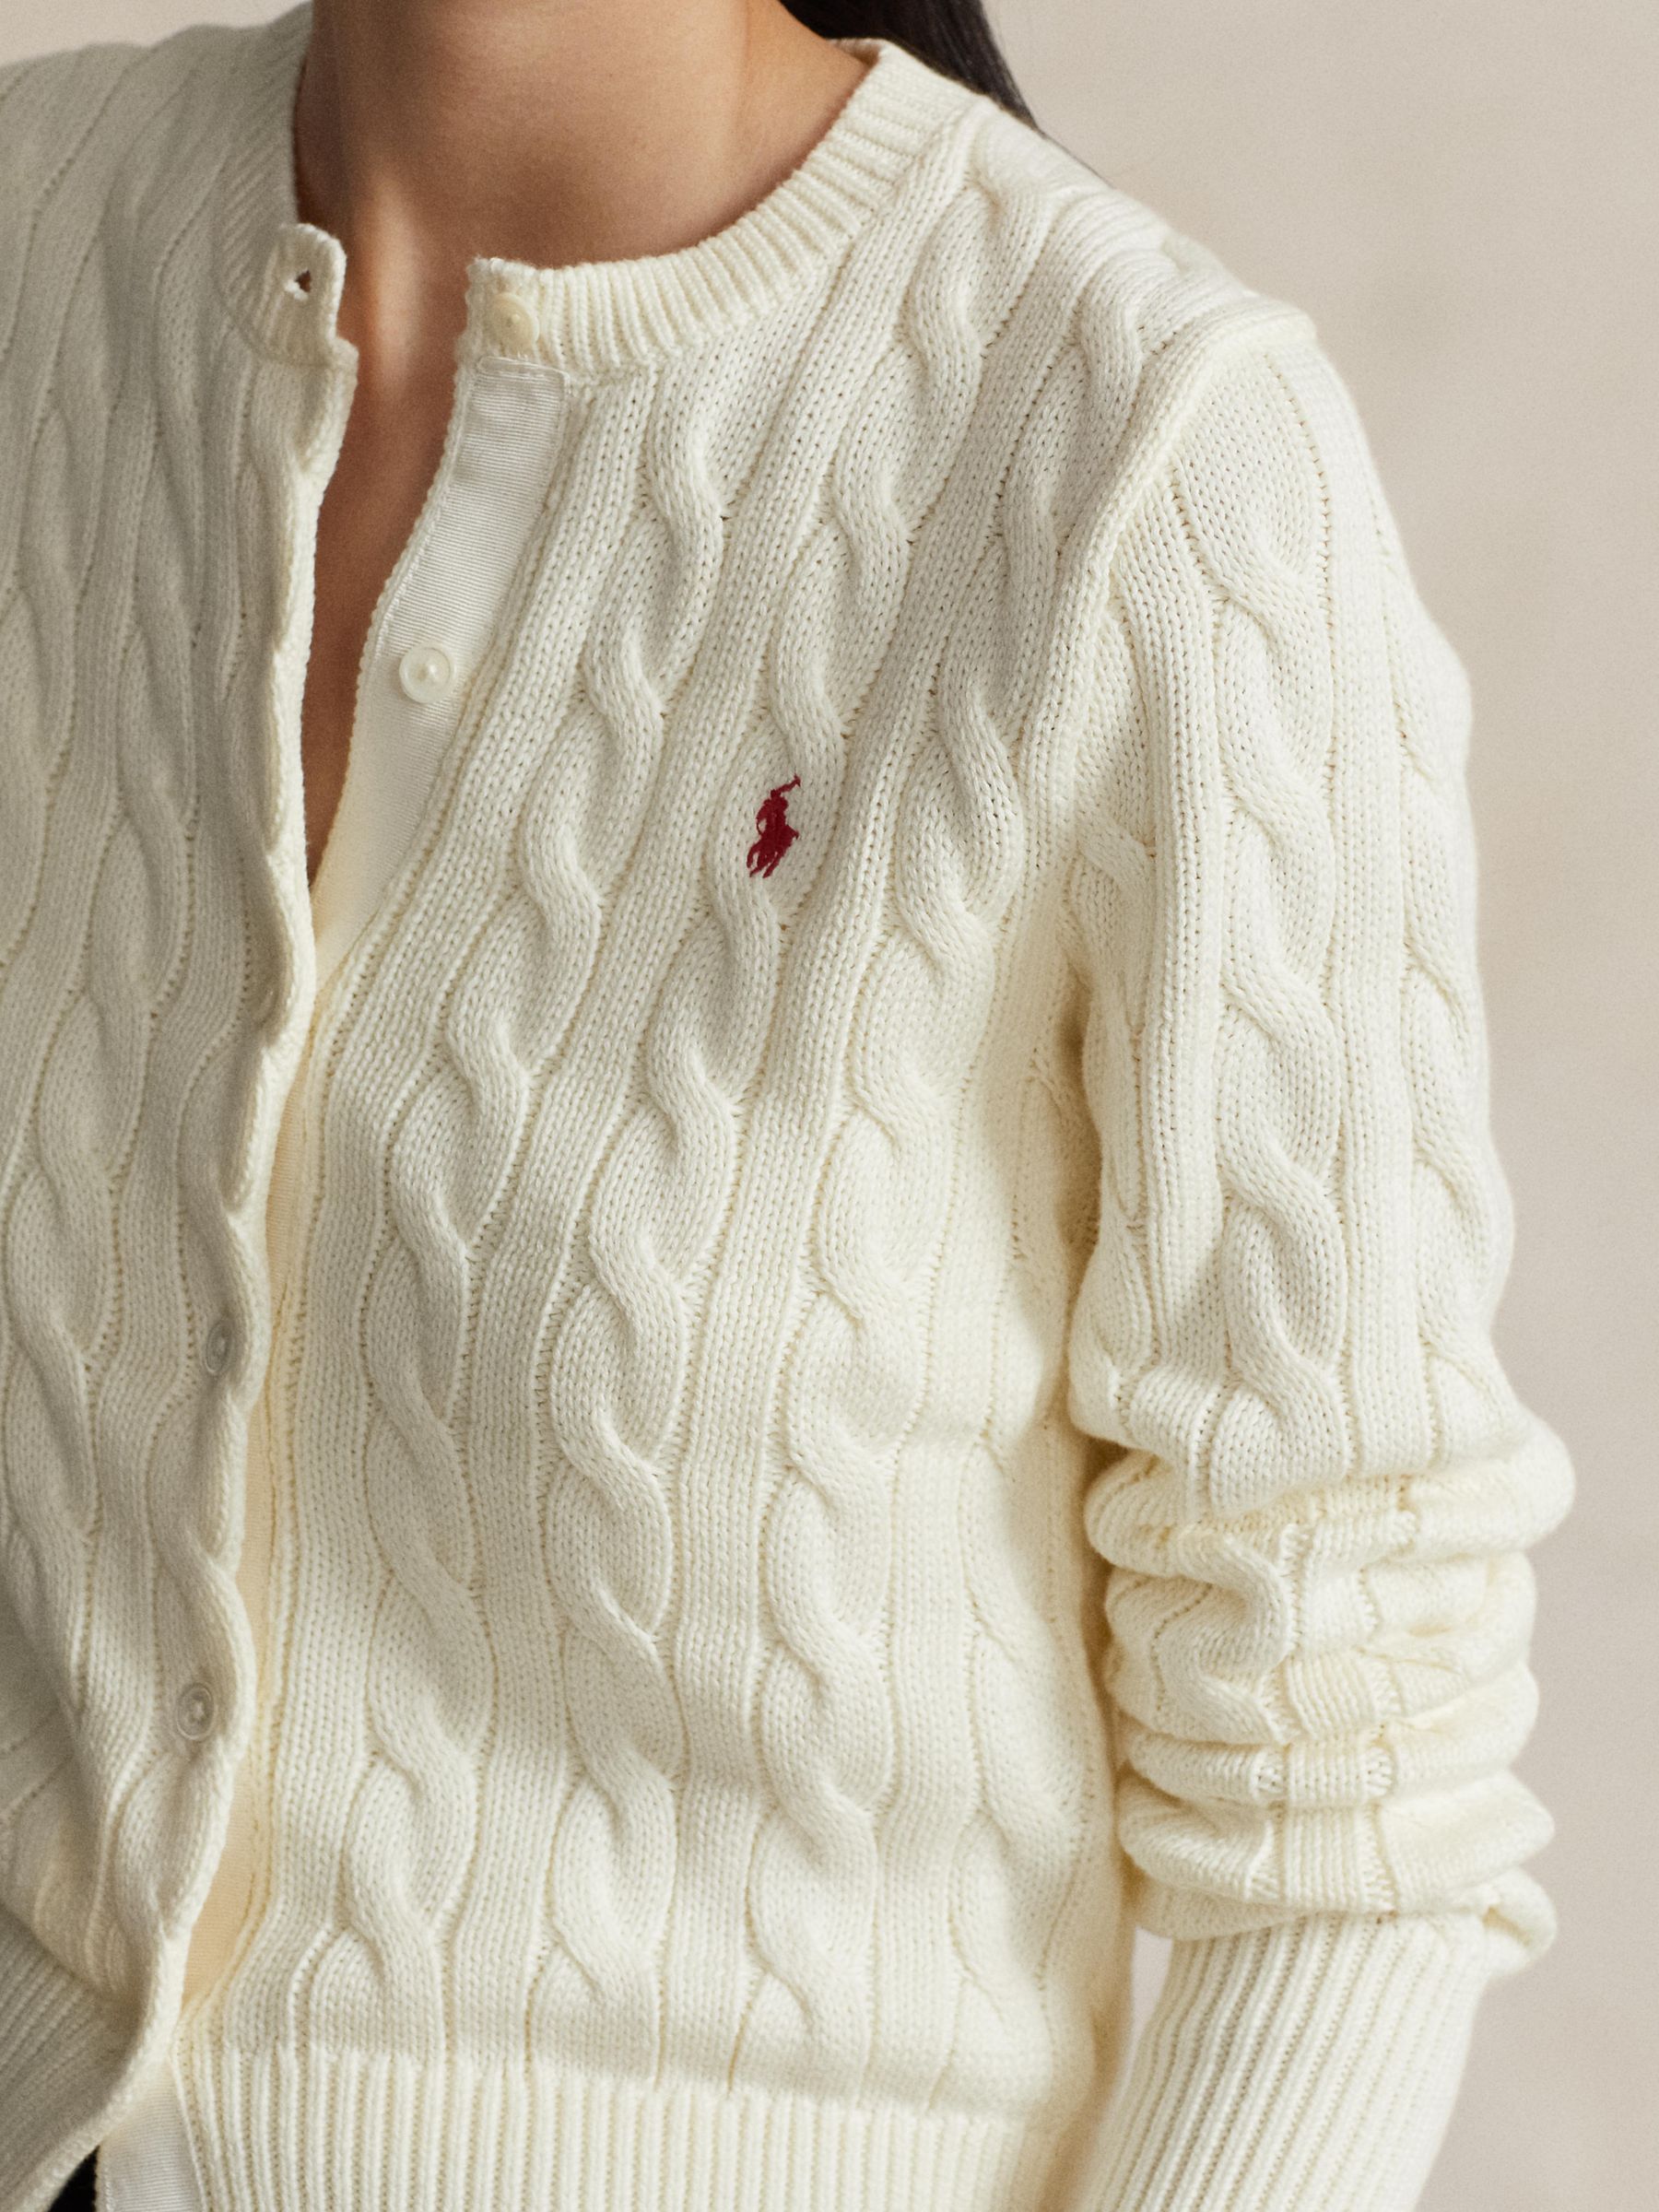 Ralph Lauren Cable-knit Cotton Cardigan in Natural